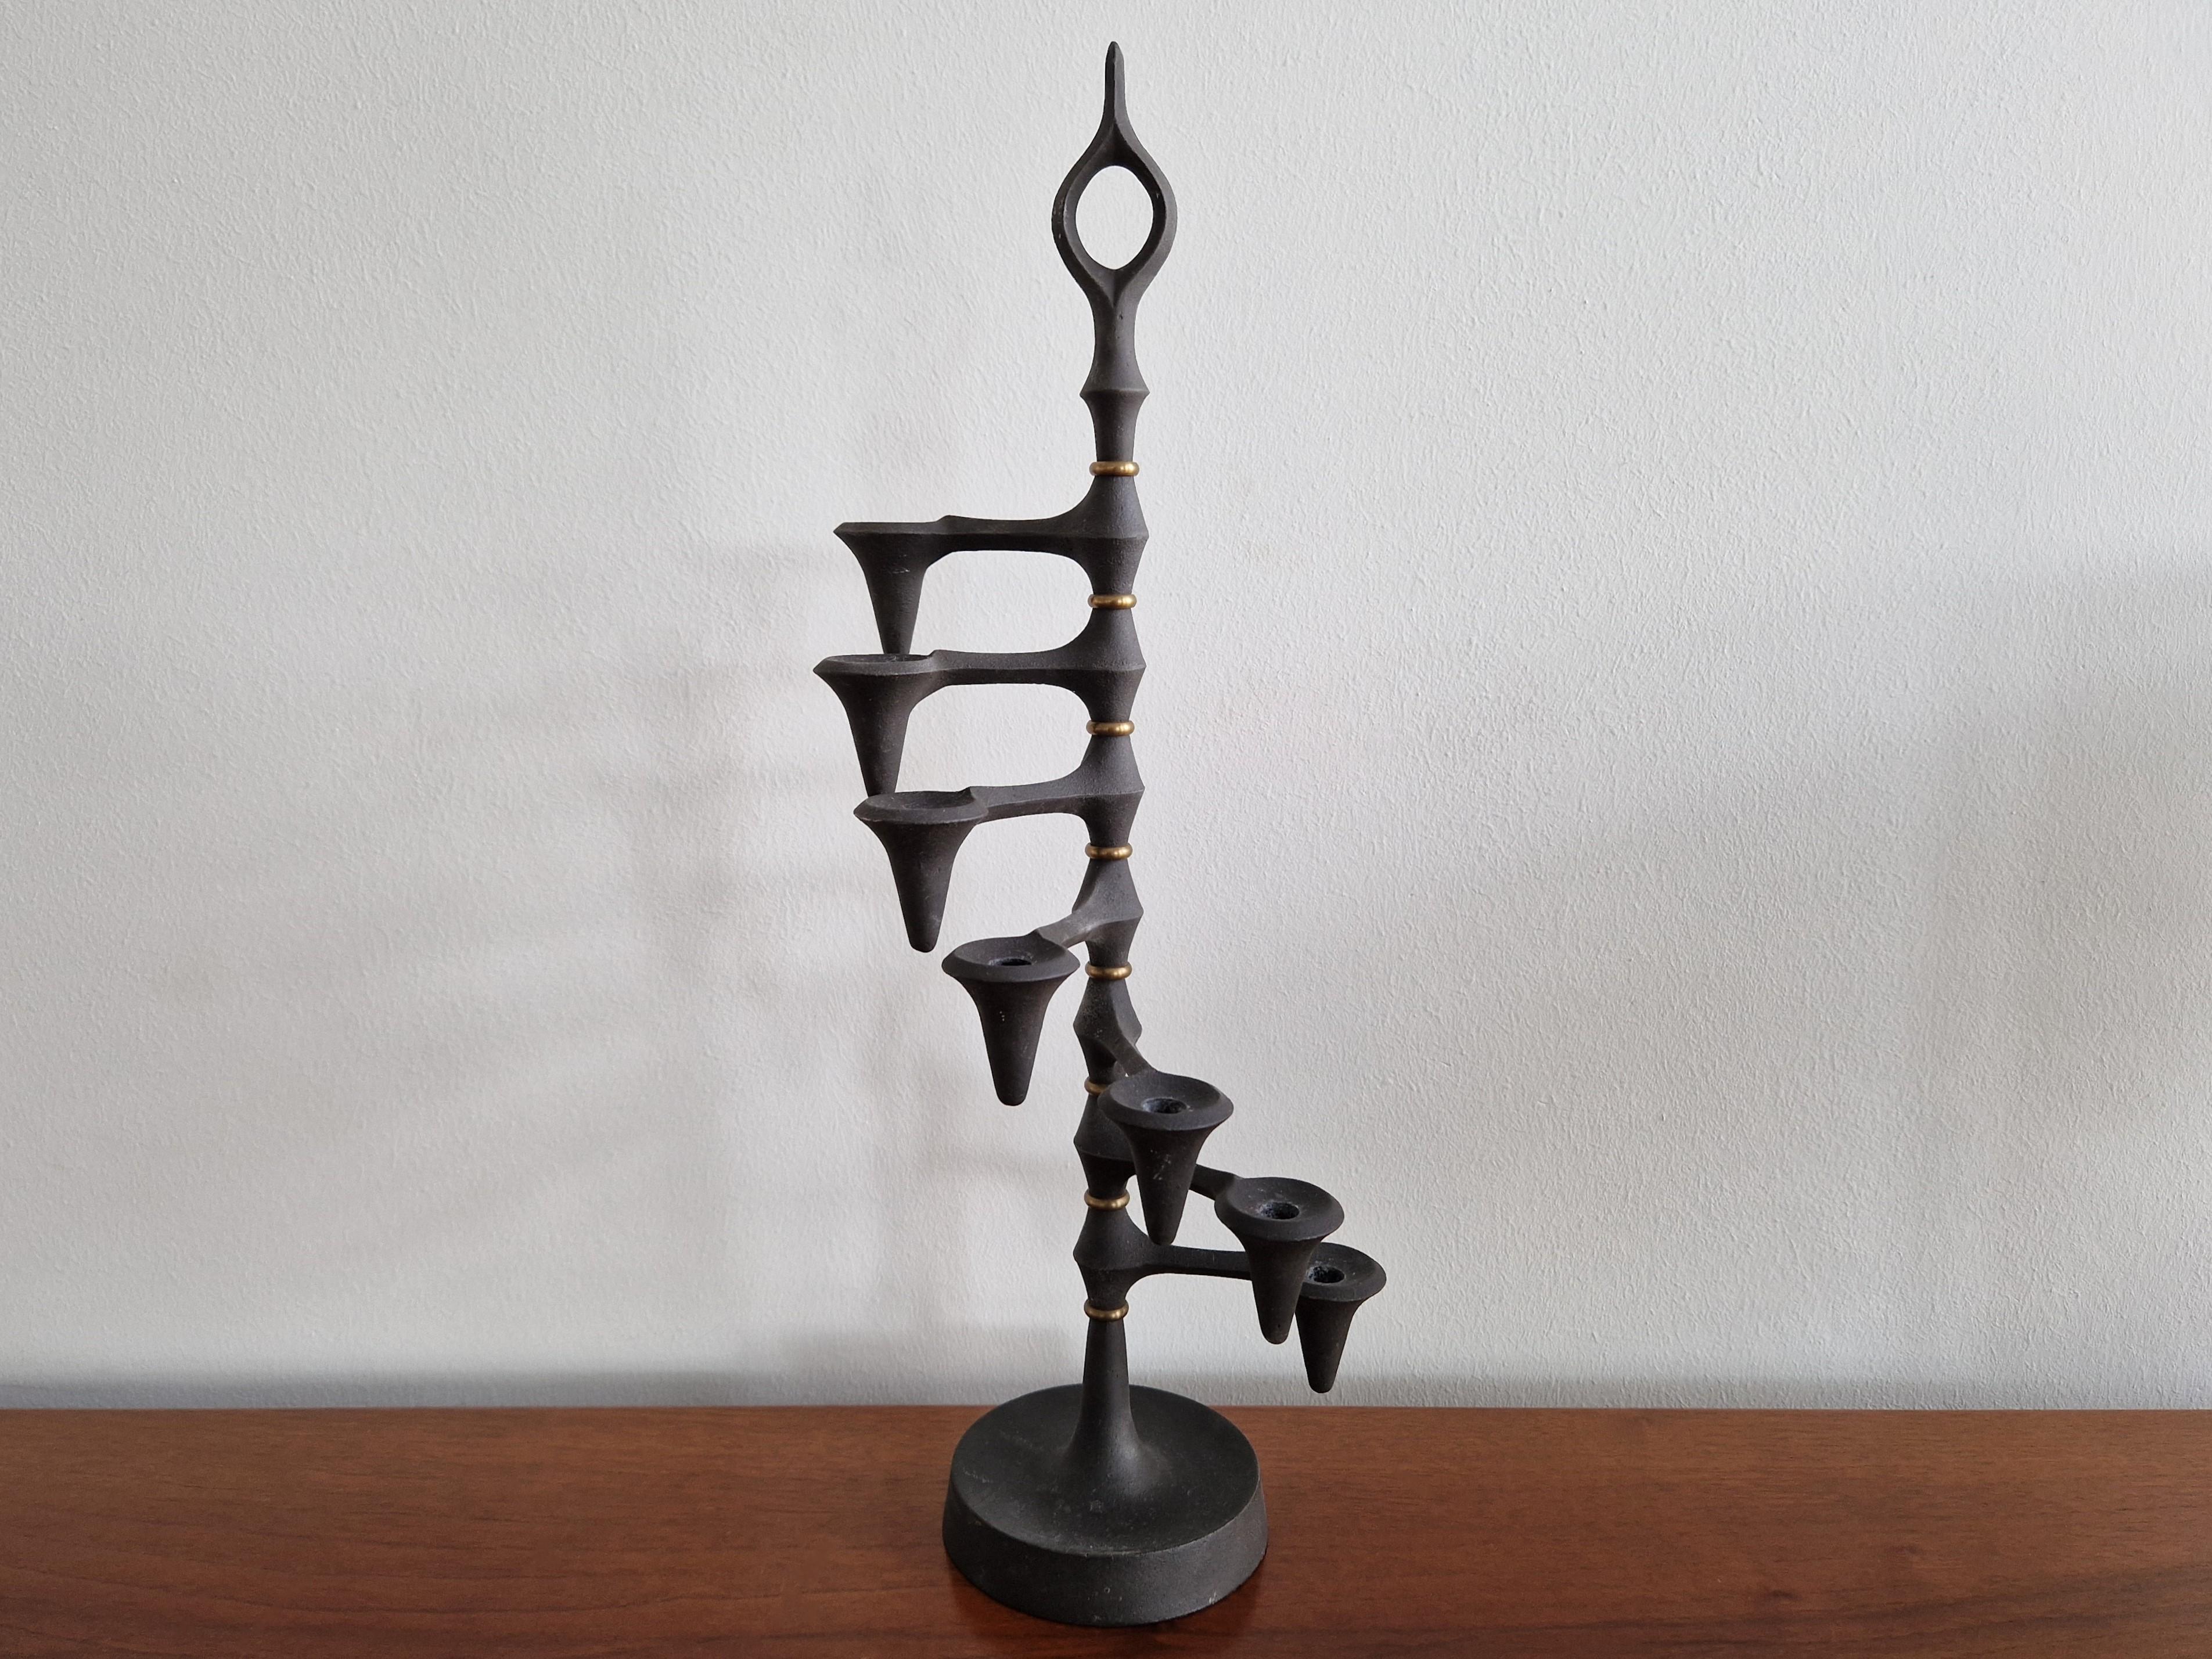 This iconic candelabra or candle holder was designed by Jens Quistgaard in the 1960s. A brutalist design that is made out of cast iron and brass. It has 7 adjustable arms that can rotate in any position. It is in a good condition with some signs of